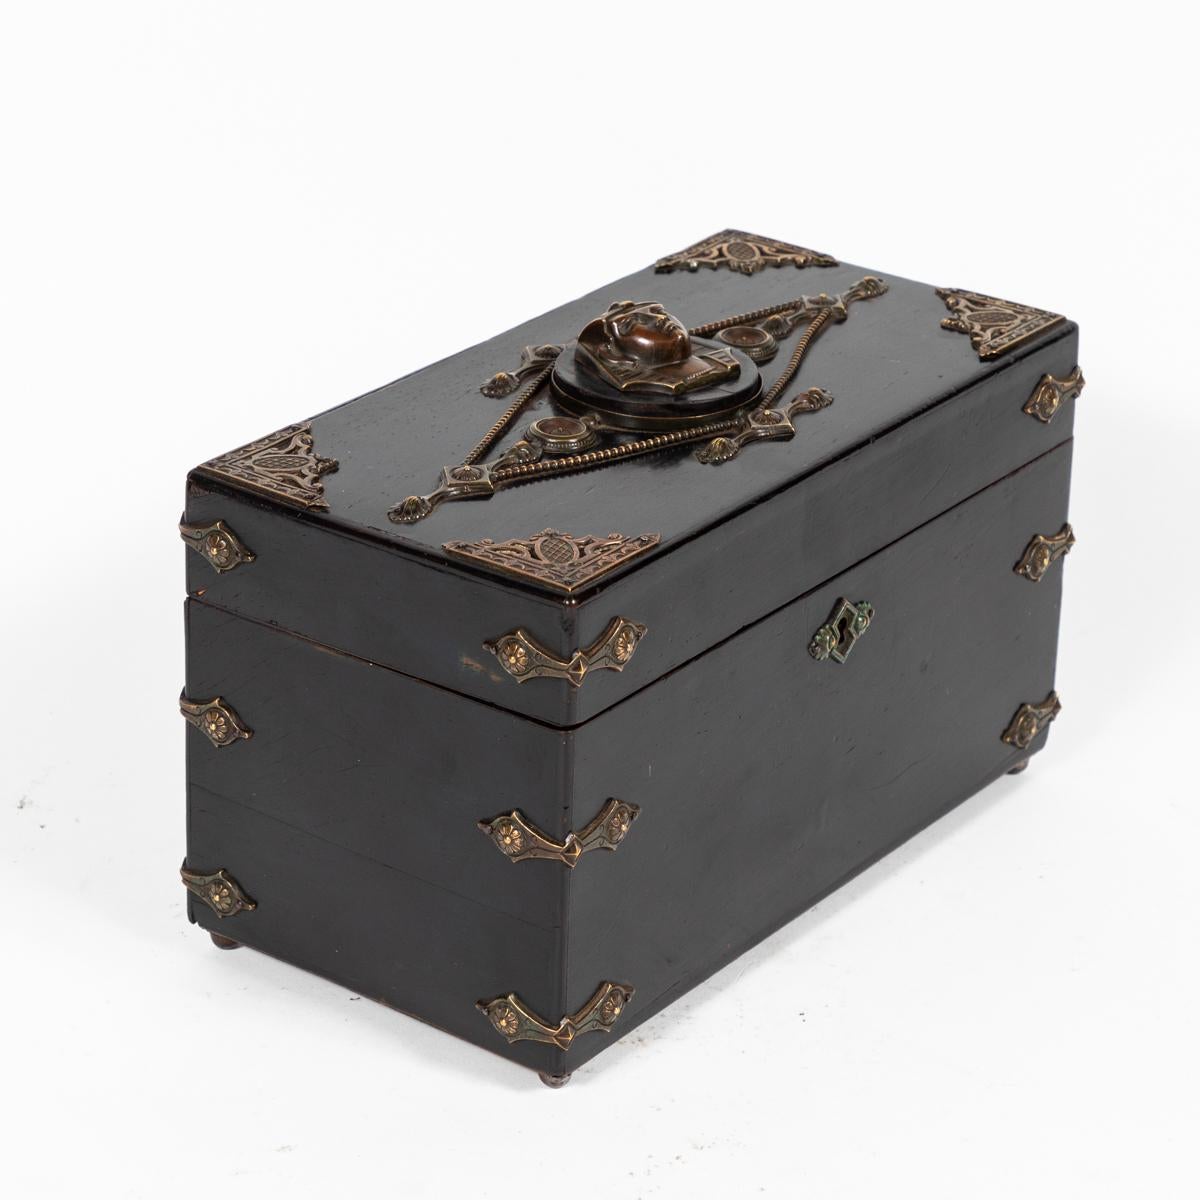 Early Victorian 19th Century Ebonized and Decorated Box with Ornate Hardware